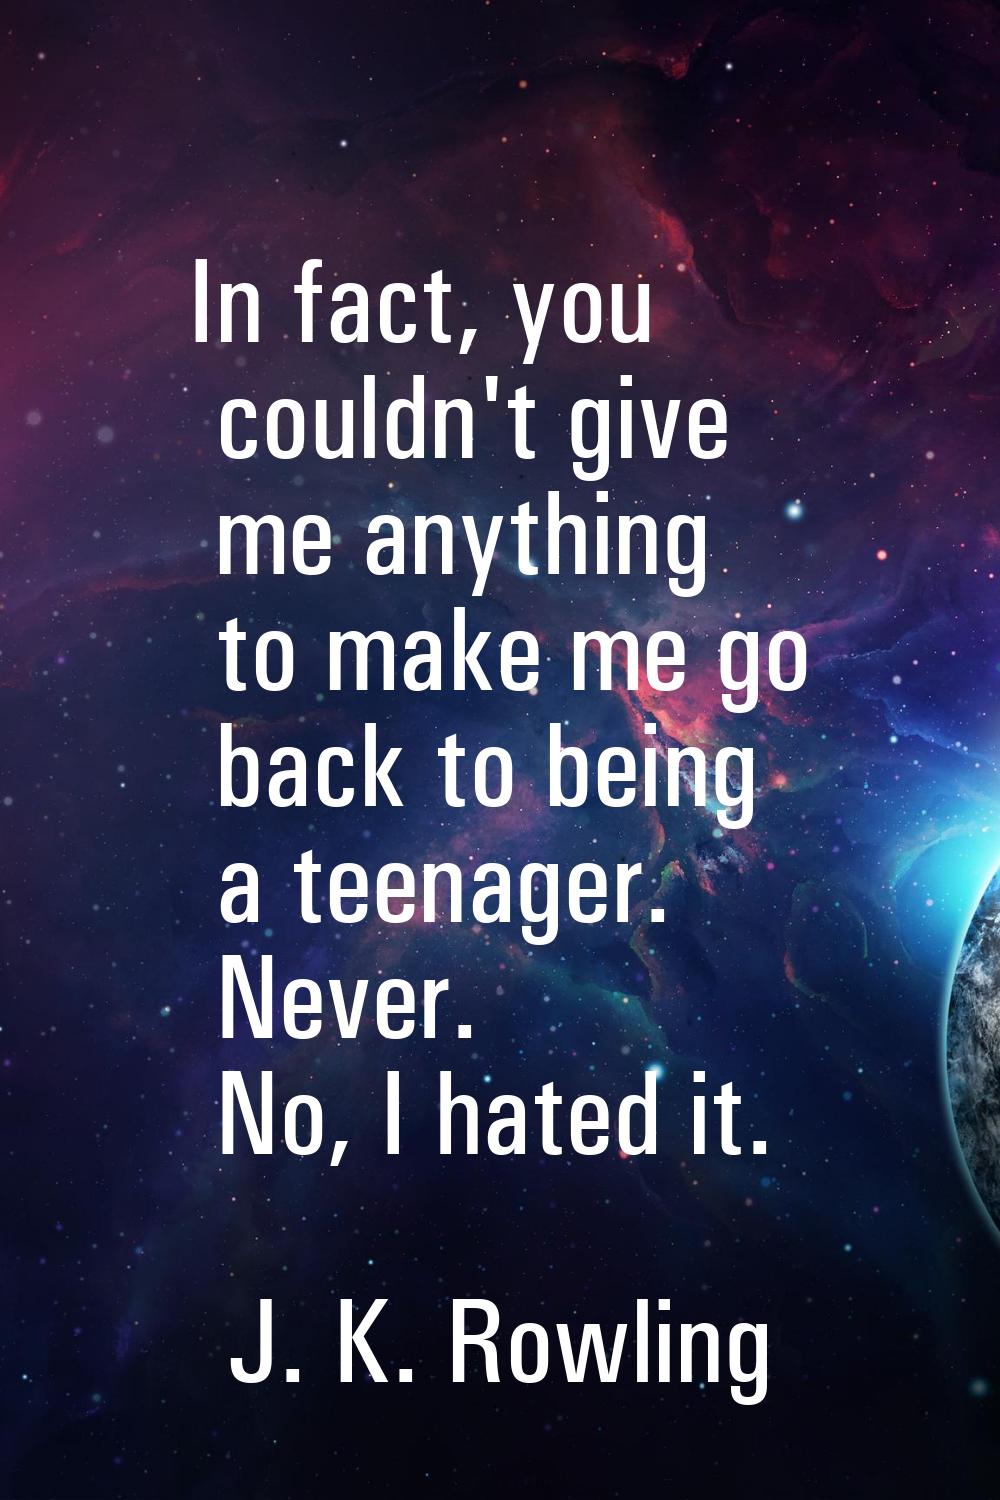 In fact, you couldn't give me anything to make me go back to being a teenager. Never. No, I hated i